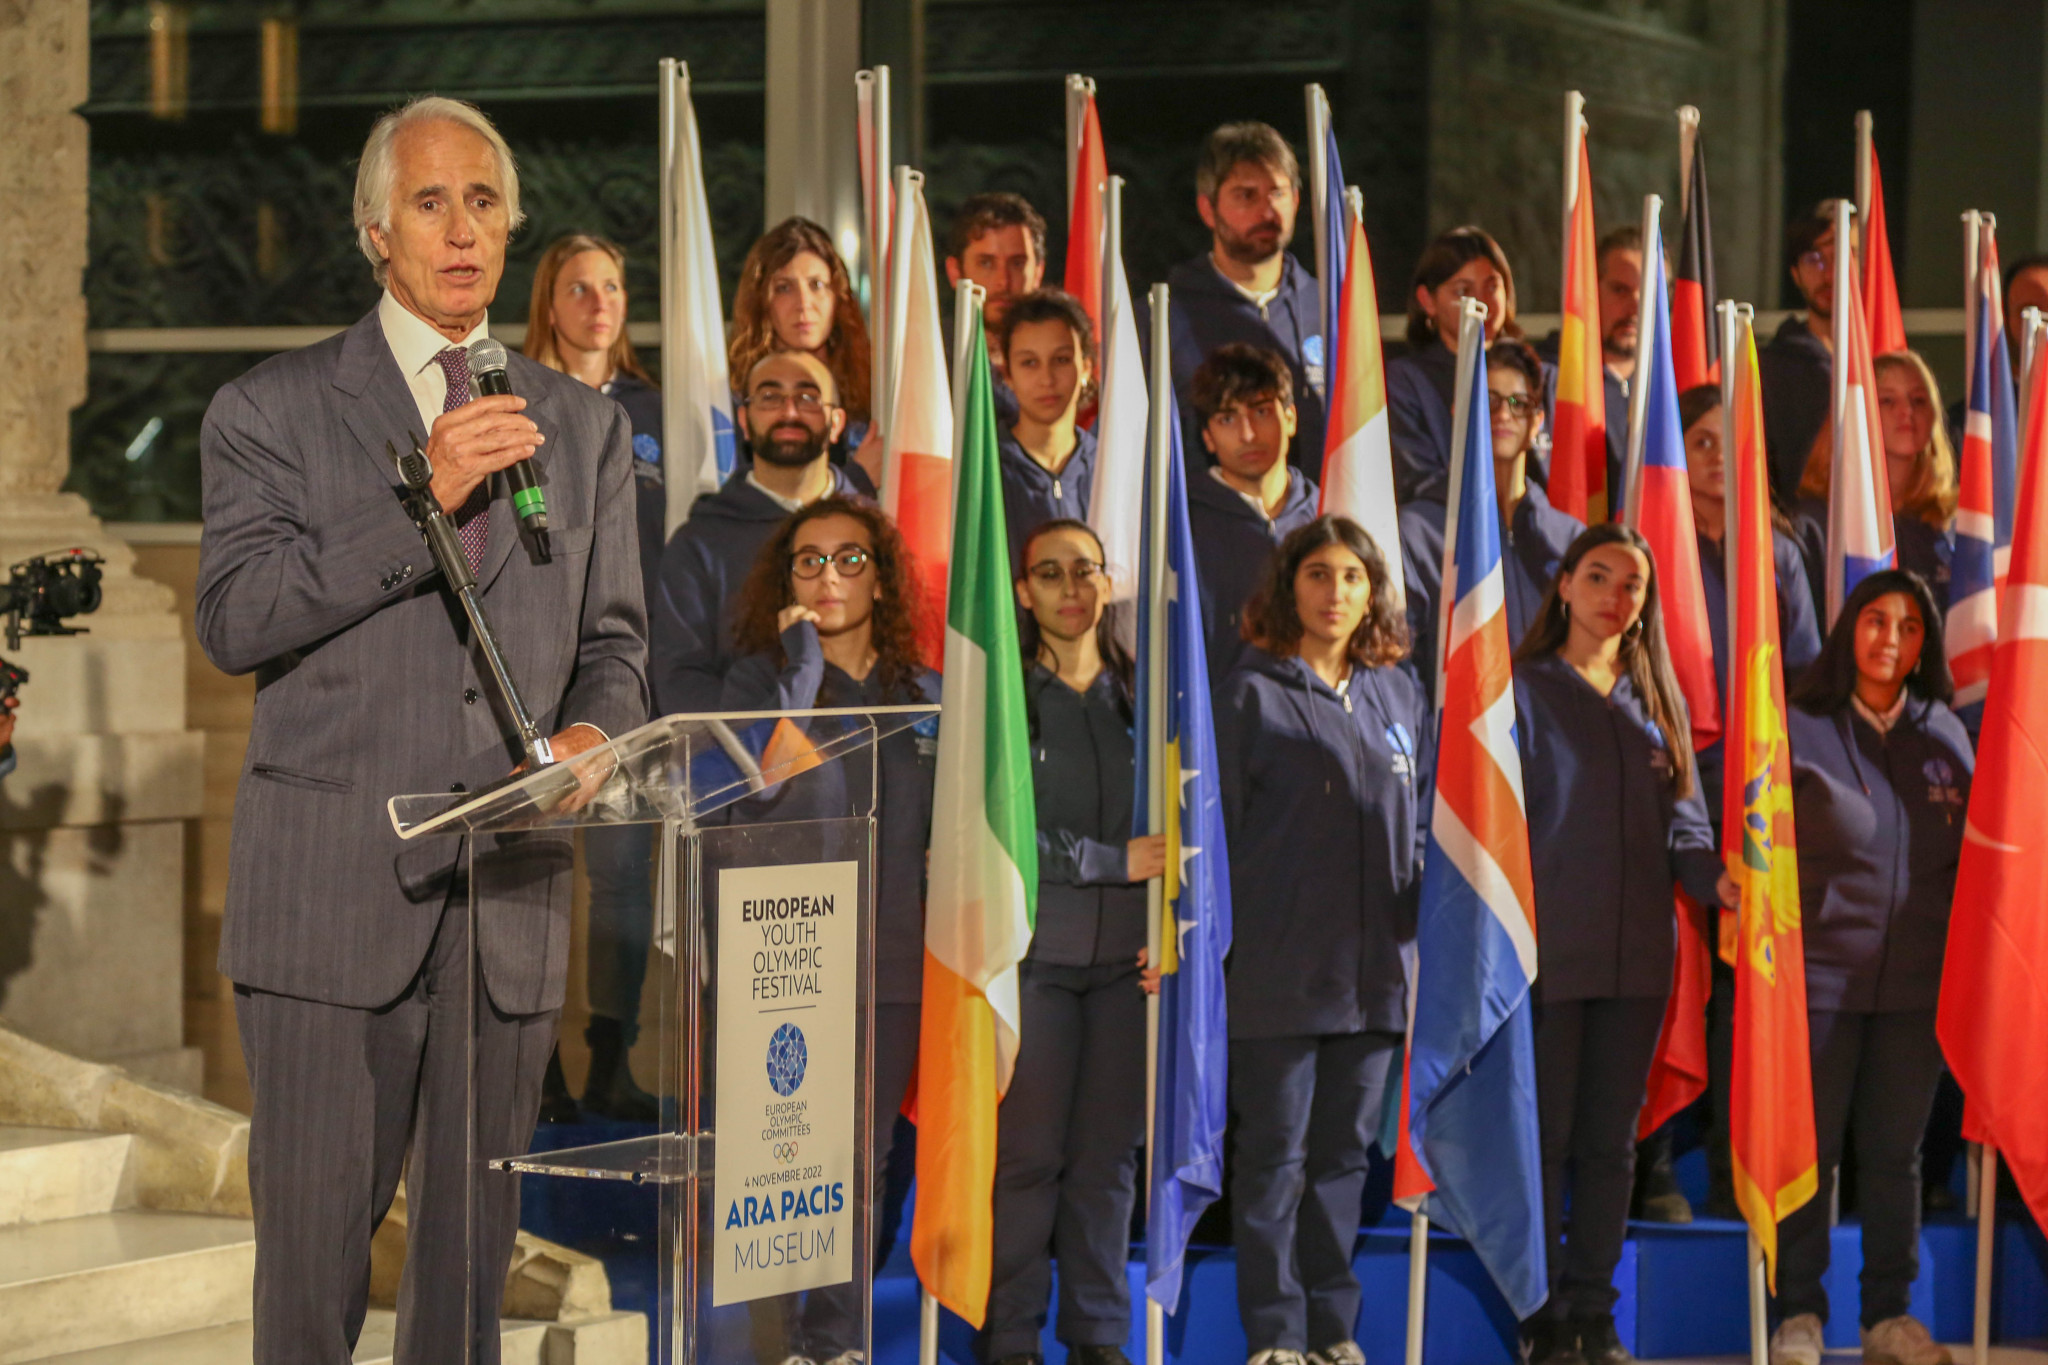 CONI President Giovanni Malagò says that Italy is the envy of everyone as it prepares to host the next Winter European Youth Olympic Festival and Winter Olympic Games ©EOC